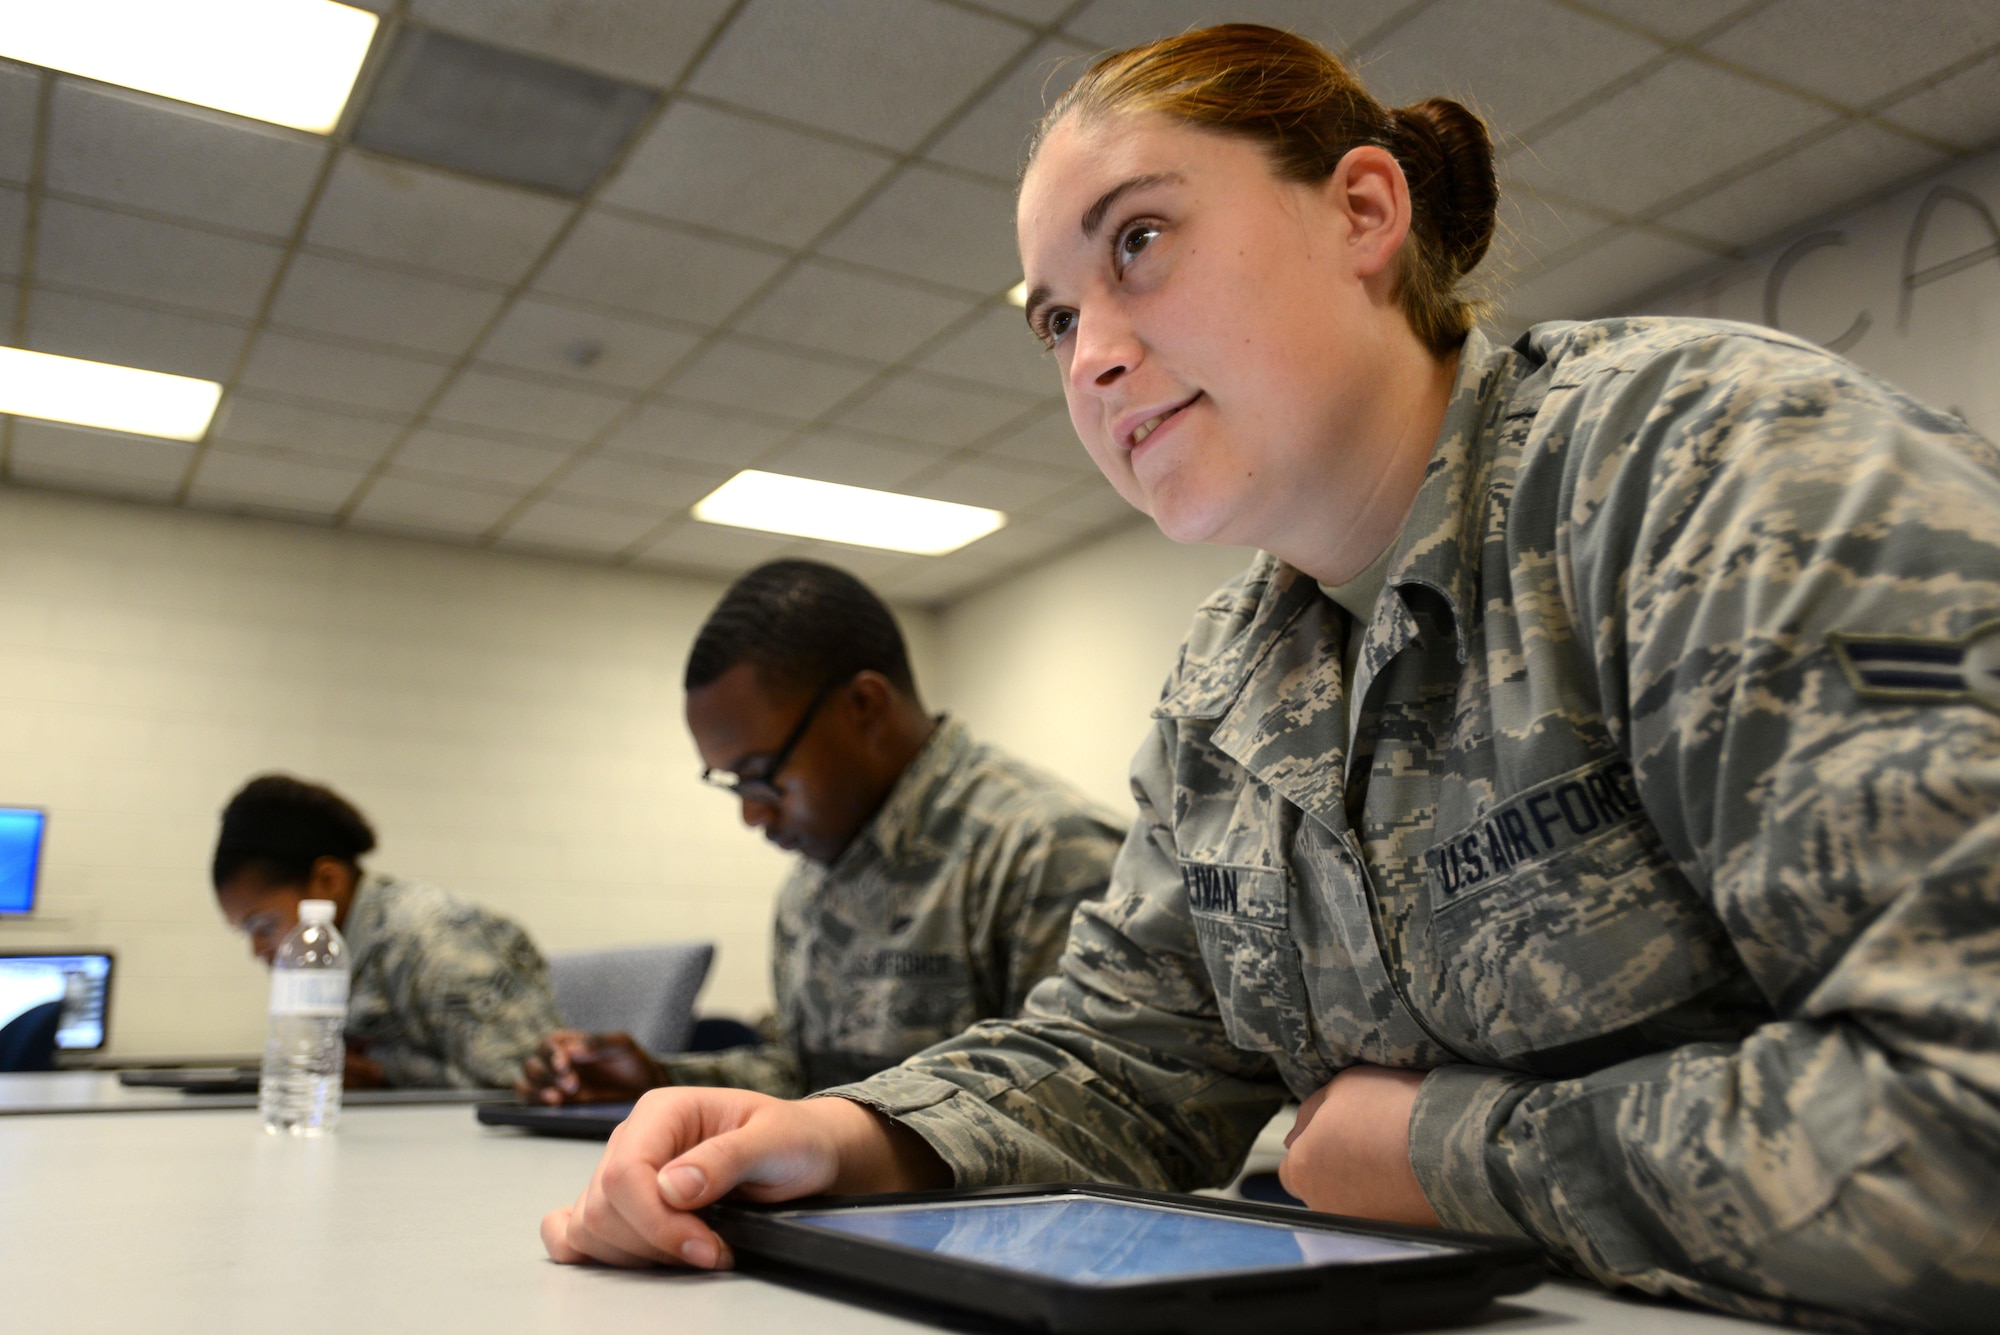 U.S. Airmen listen to their instructor during a class at the 372nd Training Squadron, Detachment 202 F-16 Field Training Detachment (FTD) at Shaw Air Force Base, S.C., April 25, 2017. The FTD teaches advanced maintenance skillsets to students from a variety of maintenance career fields, such as avionics, electrical and environmental systems, and weapons standardization. (U.S. Air Force photo by Senior Airman Kelsey Tucker)